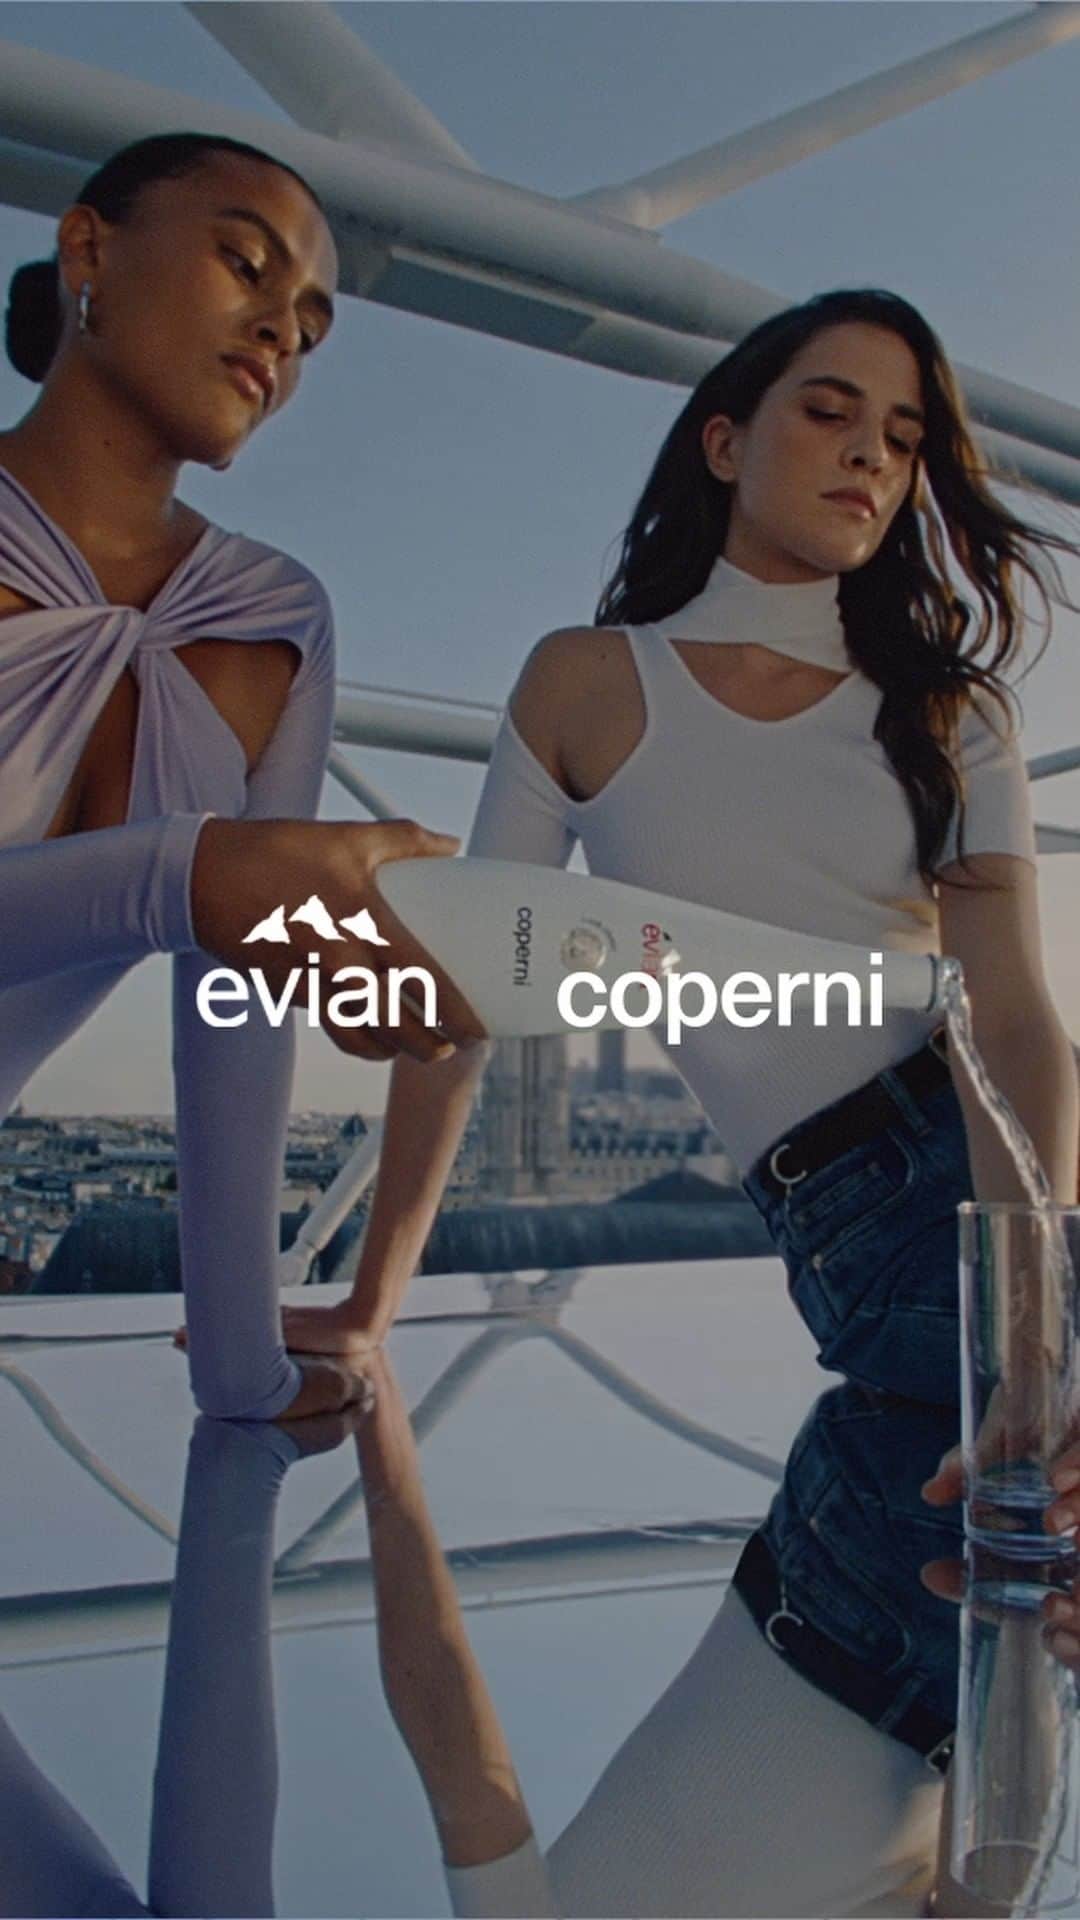 evianのインスタグラム：「Look Closer and discover constellation of health and wellness in the 2023 #LimitedEdition bottle 👁 ✨​  🎬 Directed by @camille.summersvalli the film is set atop of the iconic @legeorgesofficiel on the roof of the Centre Pompidou. We’re transported into the imagined world of the evian x @coperni constellation where movement and life converge in a mesmerizing dance of creativity and imagination 💫​  ​ See bio link for purchase details. ​  Video @camille.summersvalli Production @division.global Creative direction @kevintekinel and @charleslevai​ Stylist @helenatejedor Location @legeorgesofficiel  #evianxCoperni #LiveYoung #LookCloser ​  ​」